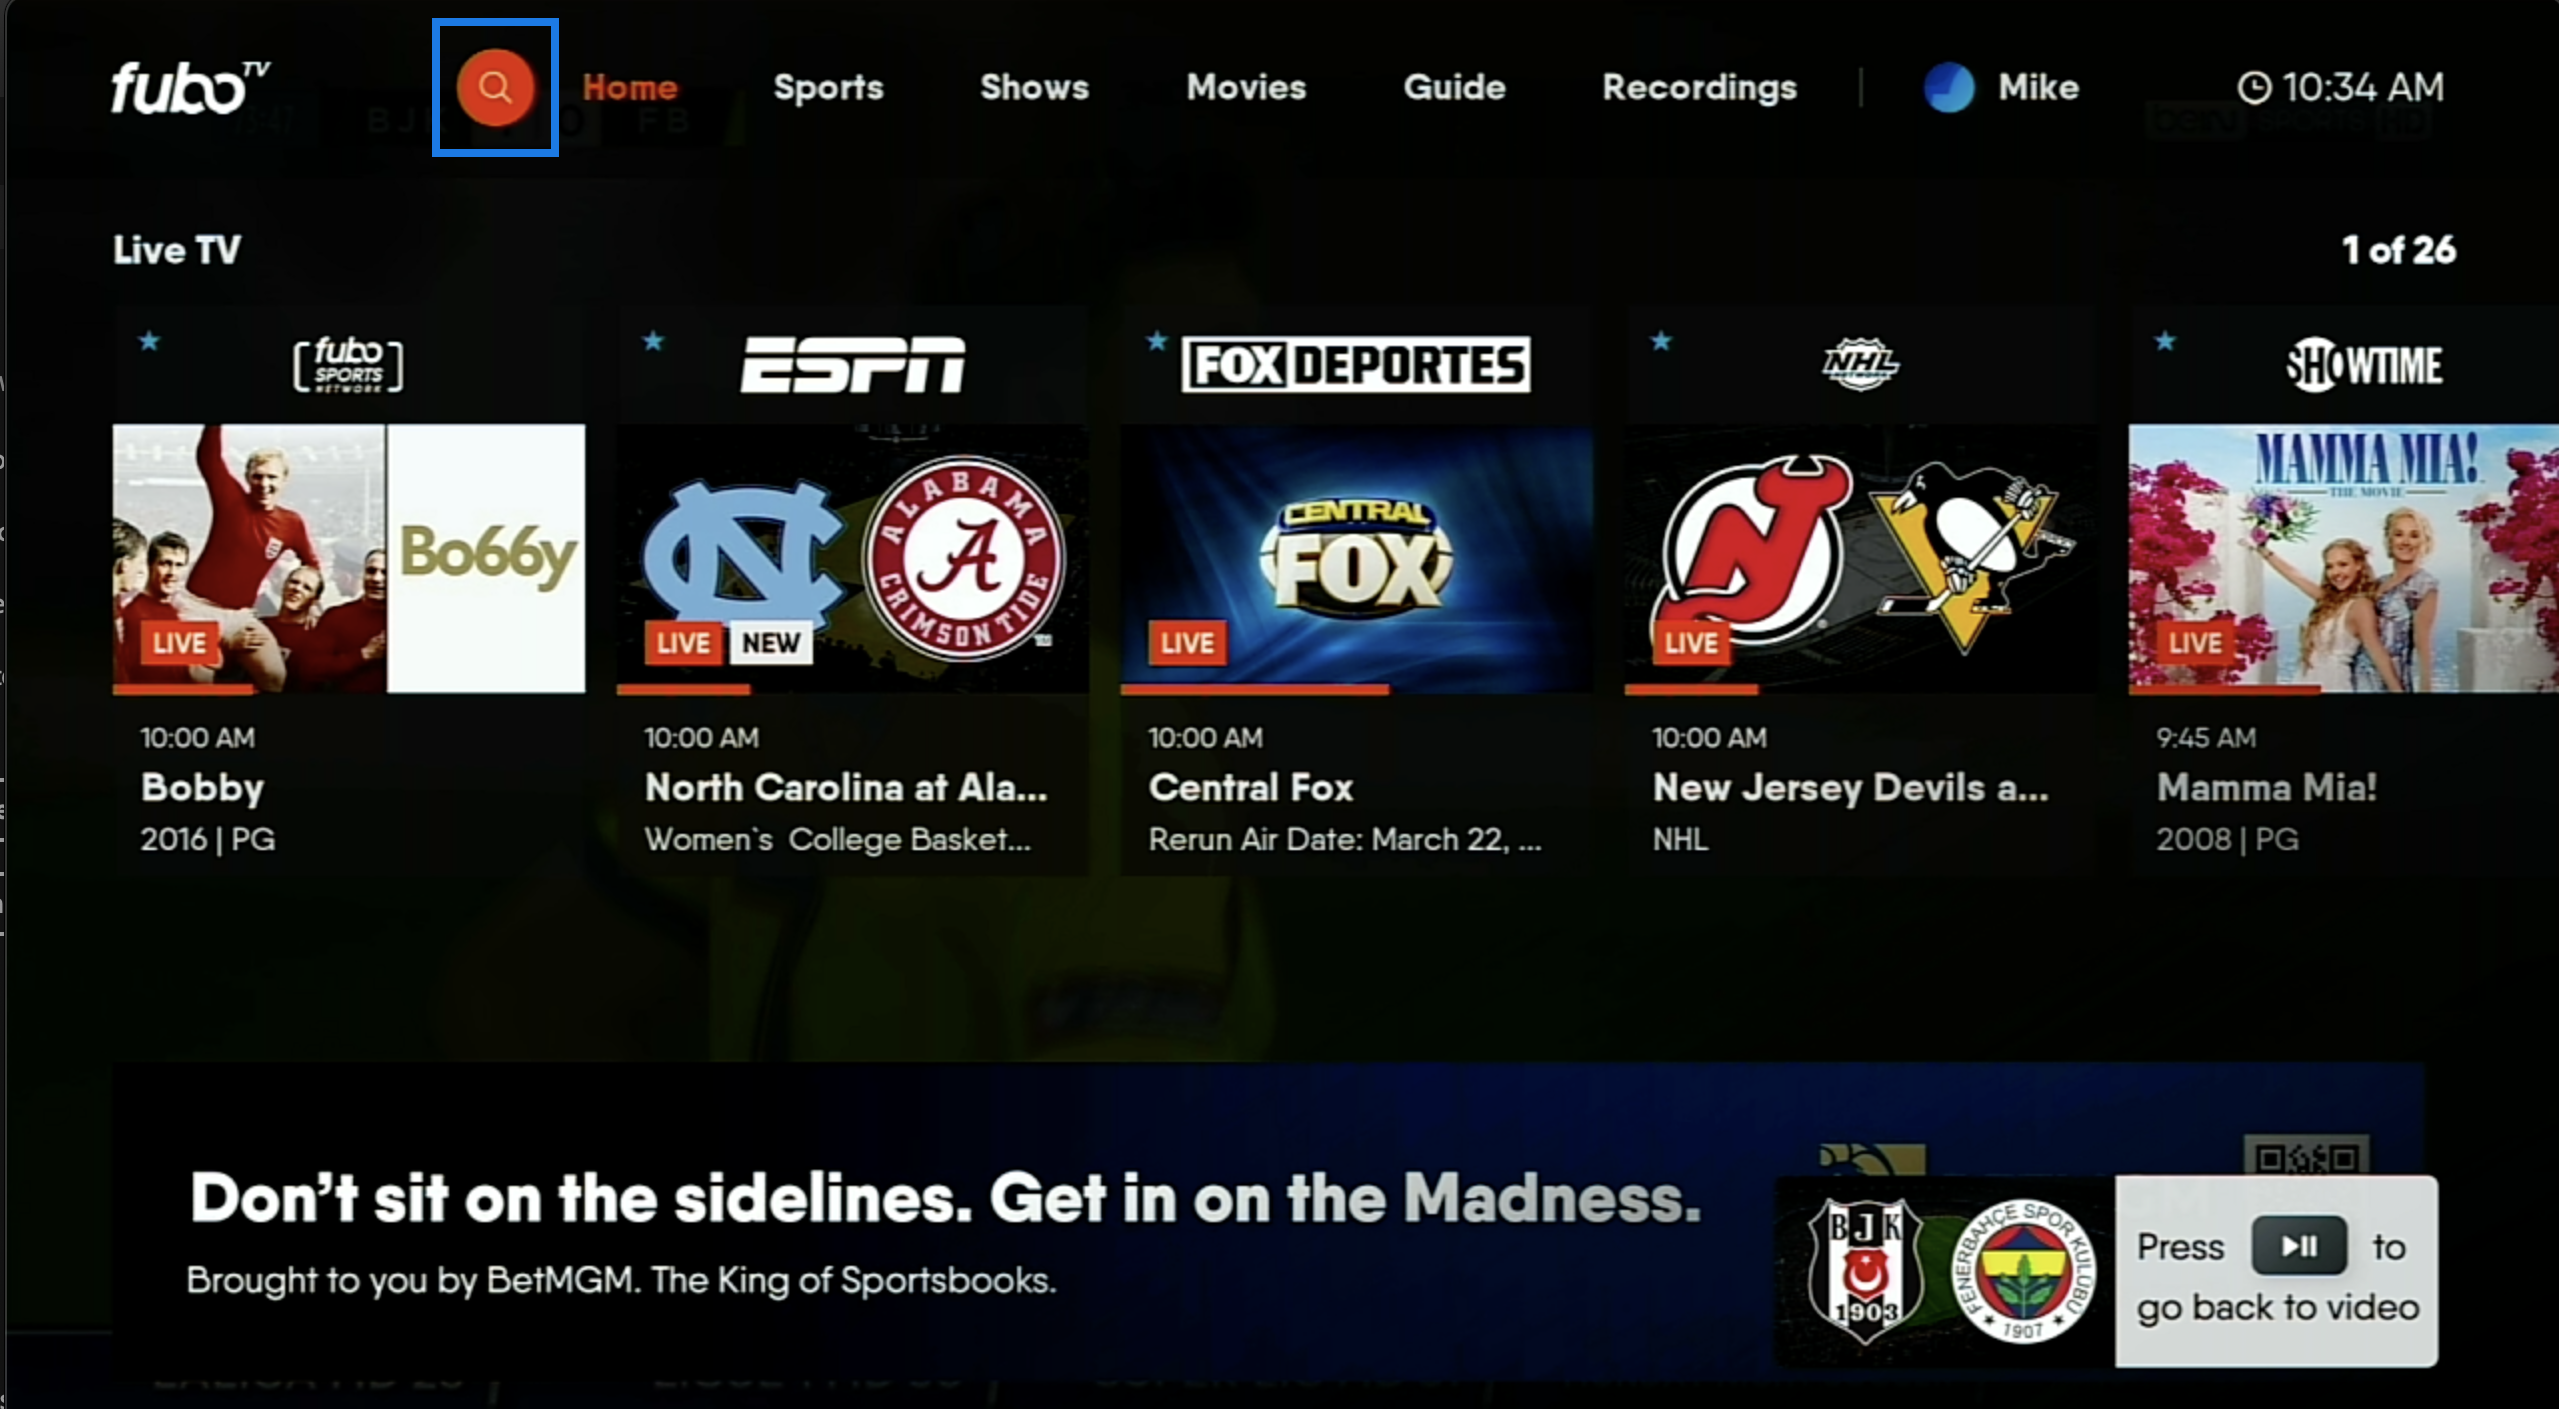 Home screen of the FuboTV app on Roku with search icon highlighted in upper-left